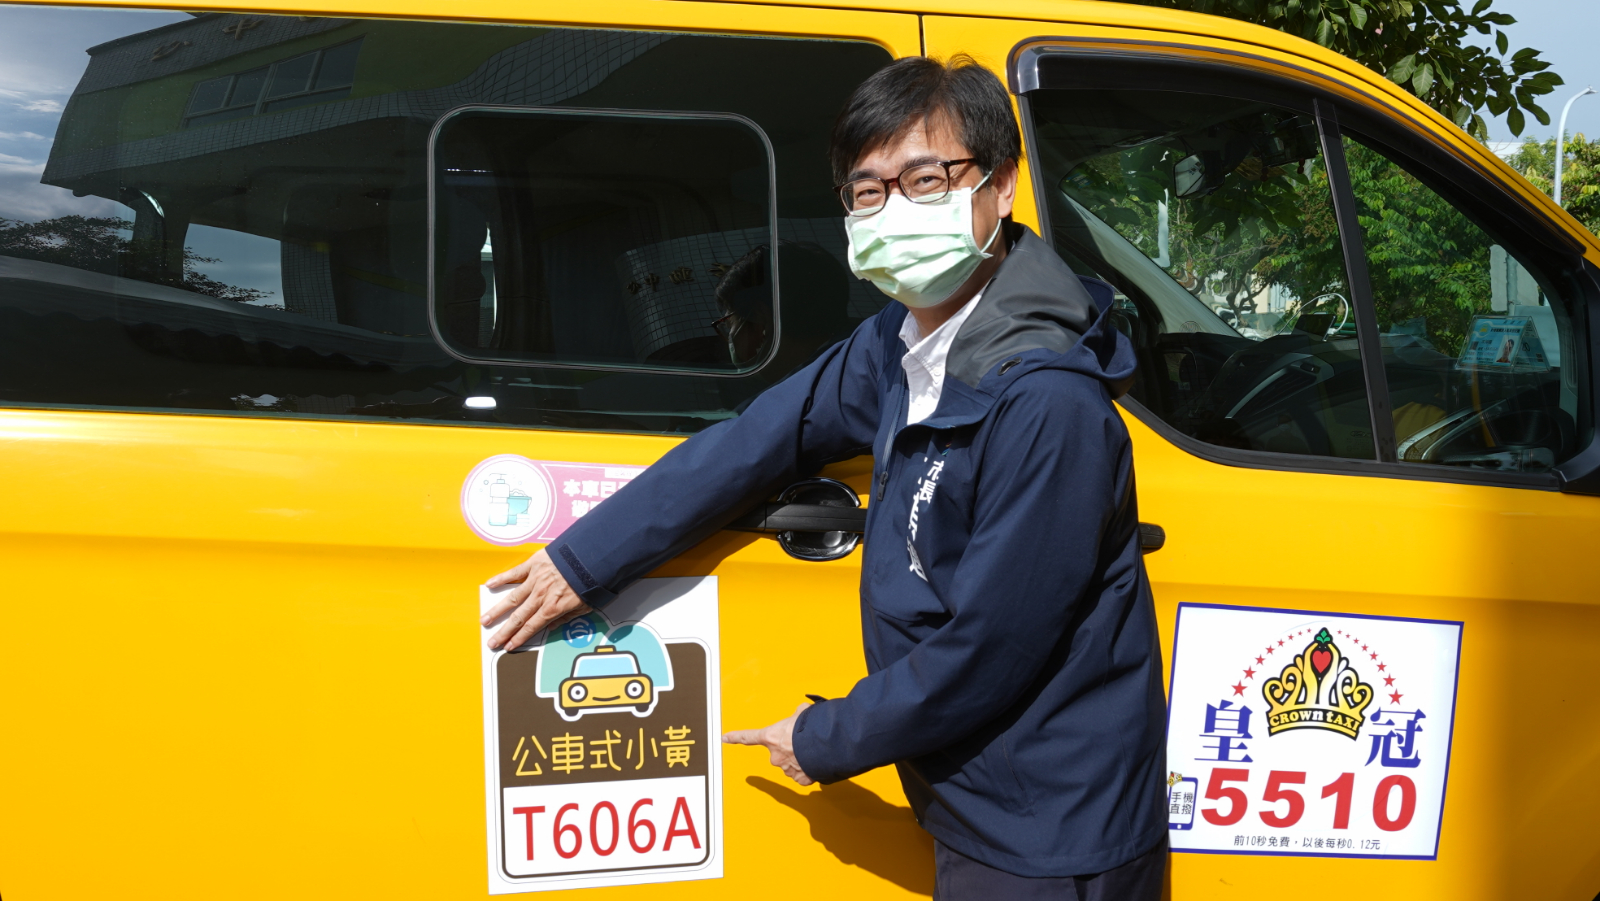 The Bureau of Transportation, Kaohsiung City Government began promoting its Taxi-Bus Service in 2014, greatly reducing operating costs and increasing service flexibility by replacing traditional buses with taxis. (Photo courtesy of the Bureau of Transportation, Kaohsiung City Government)